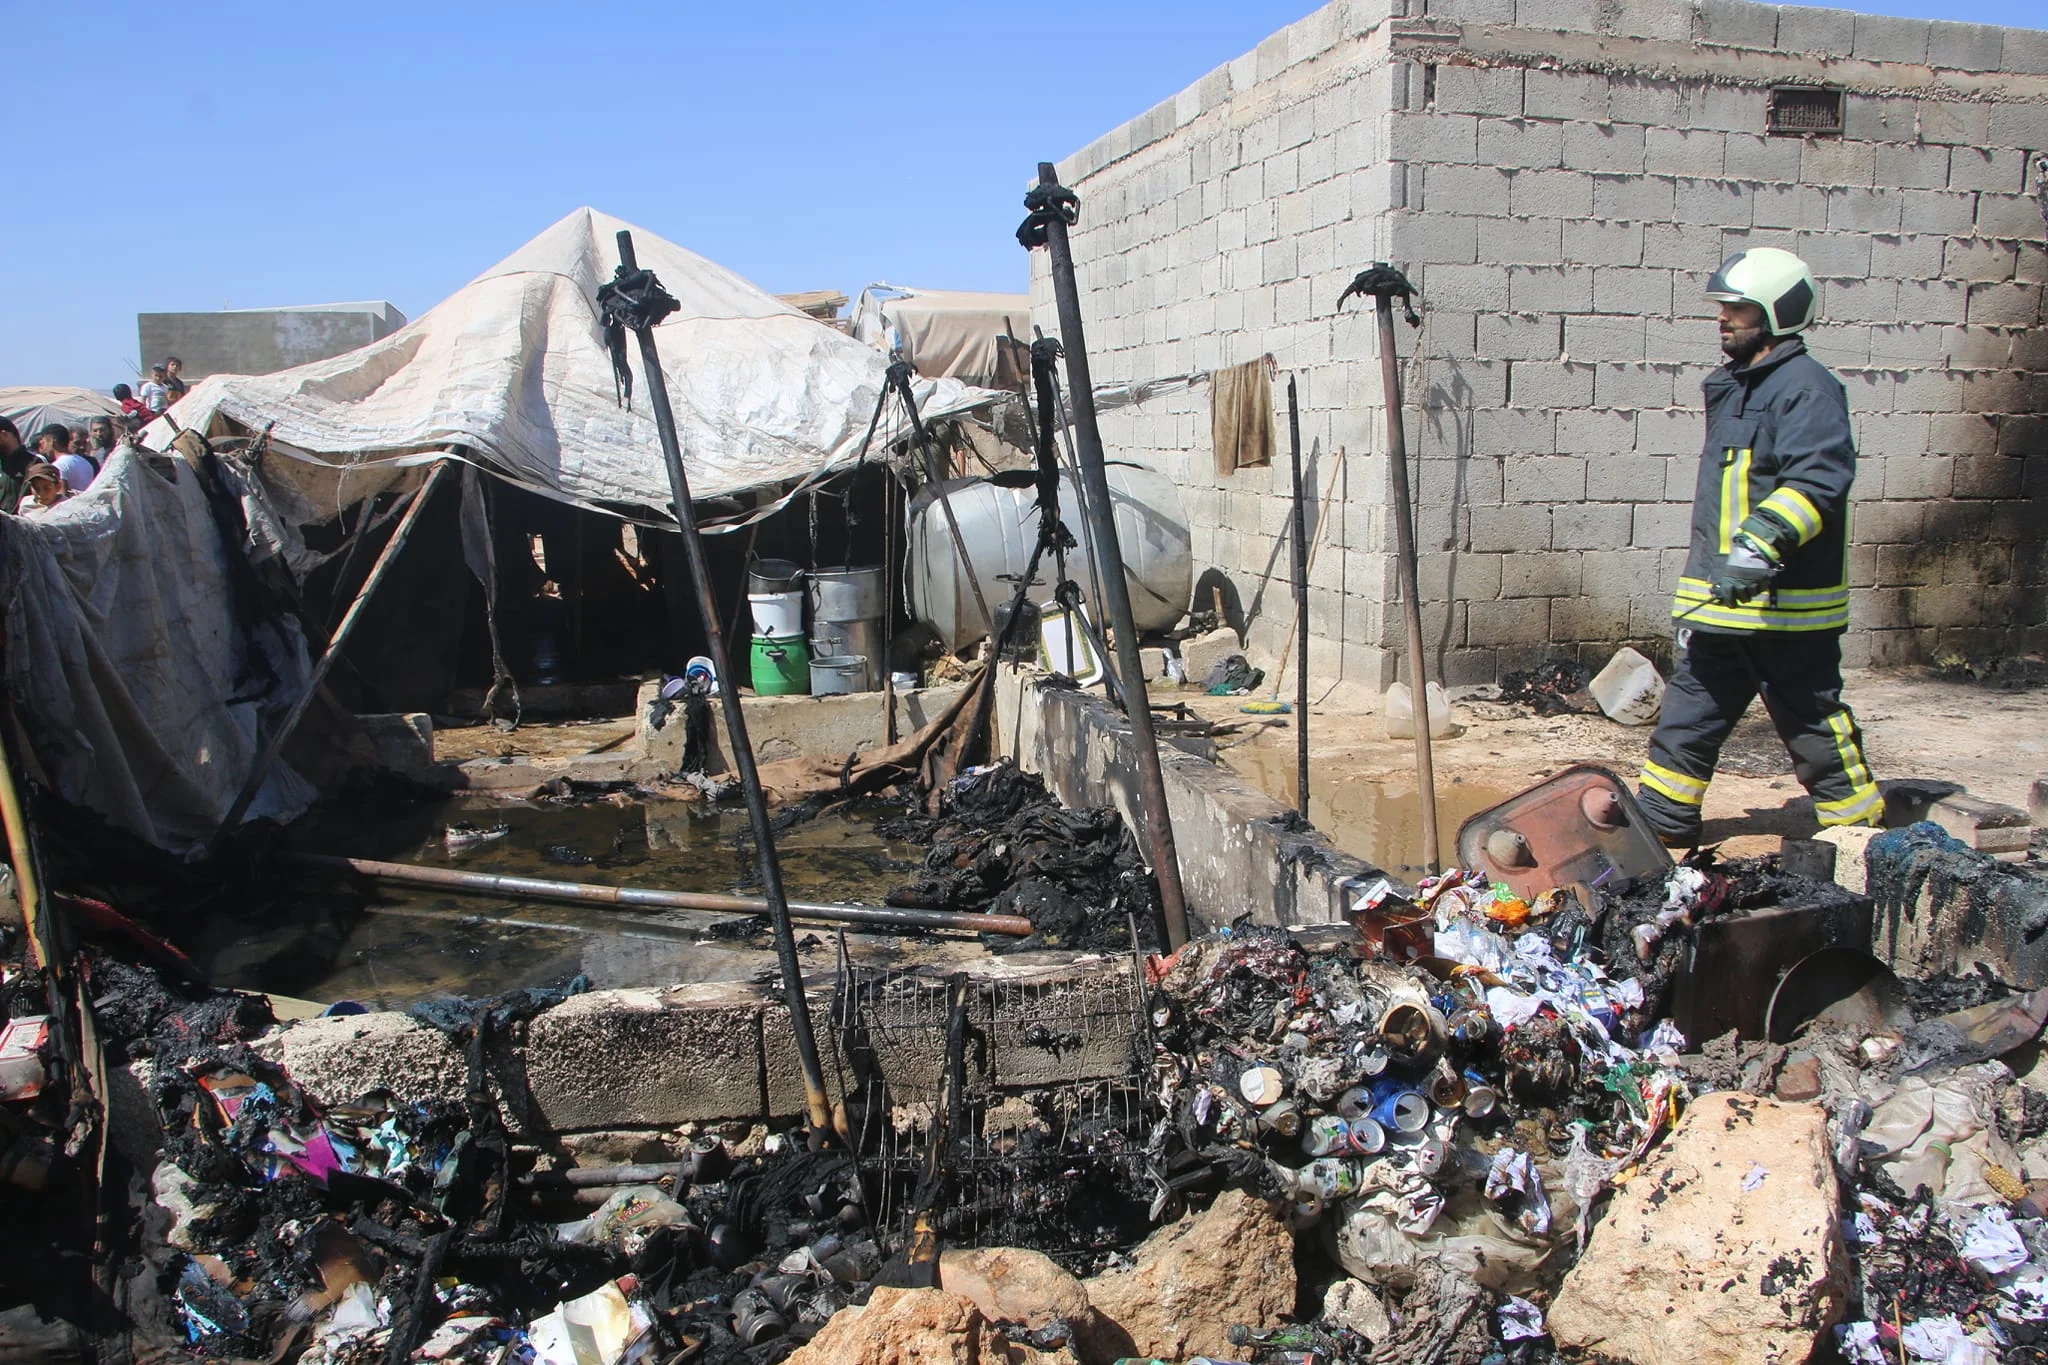 A fire broke out at an IDPs Camp in northern Idlib governorate on September 28